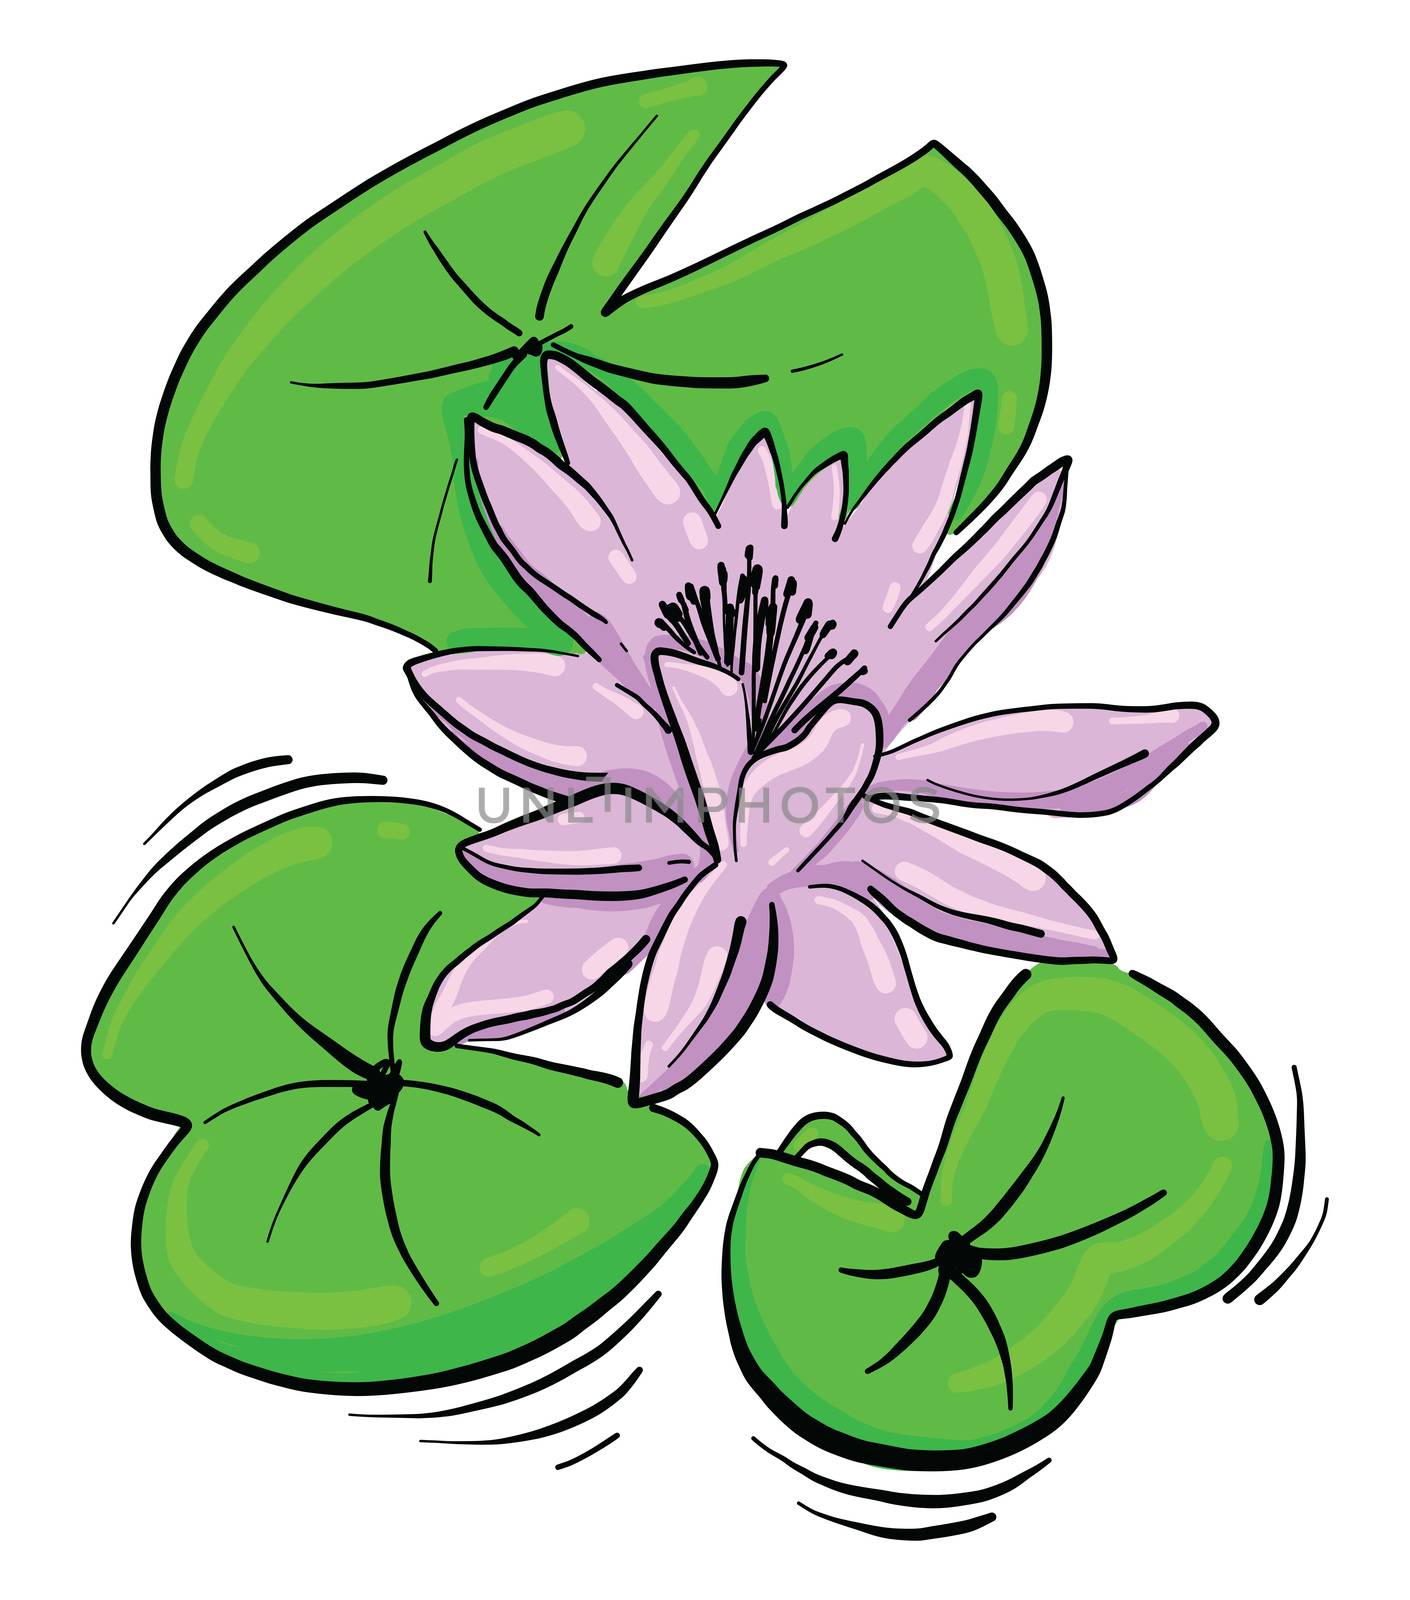 Water lilies , illustration, vector on white background